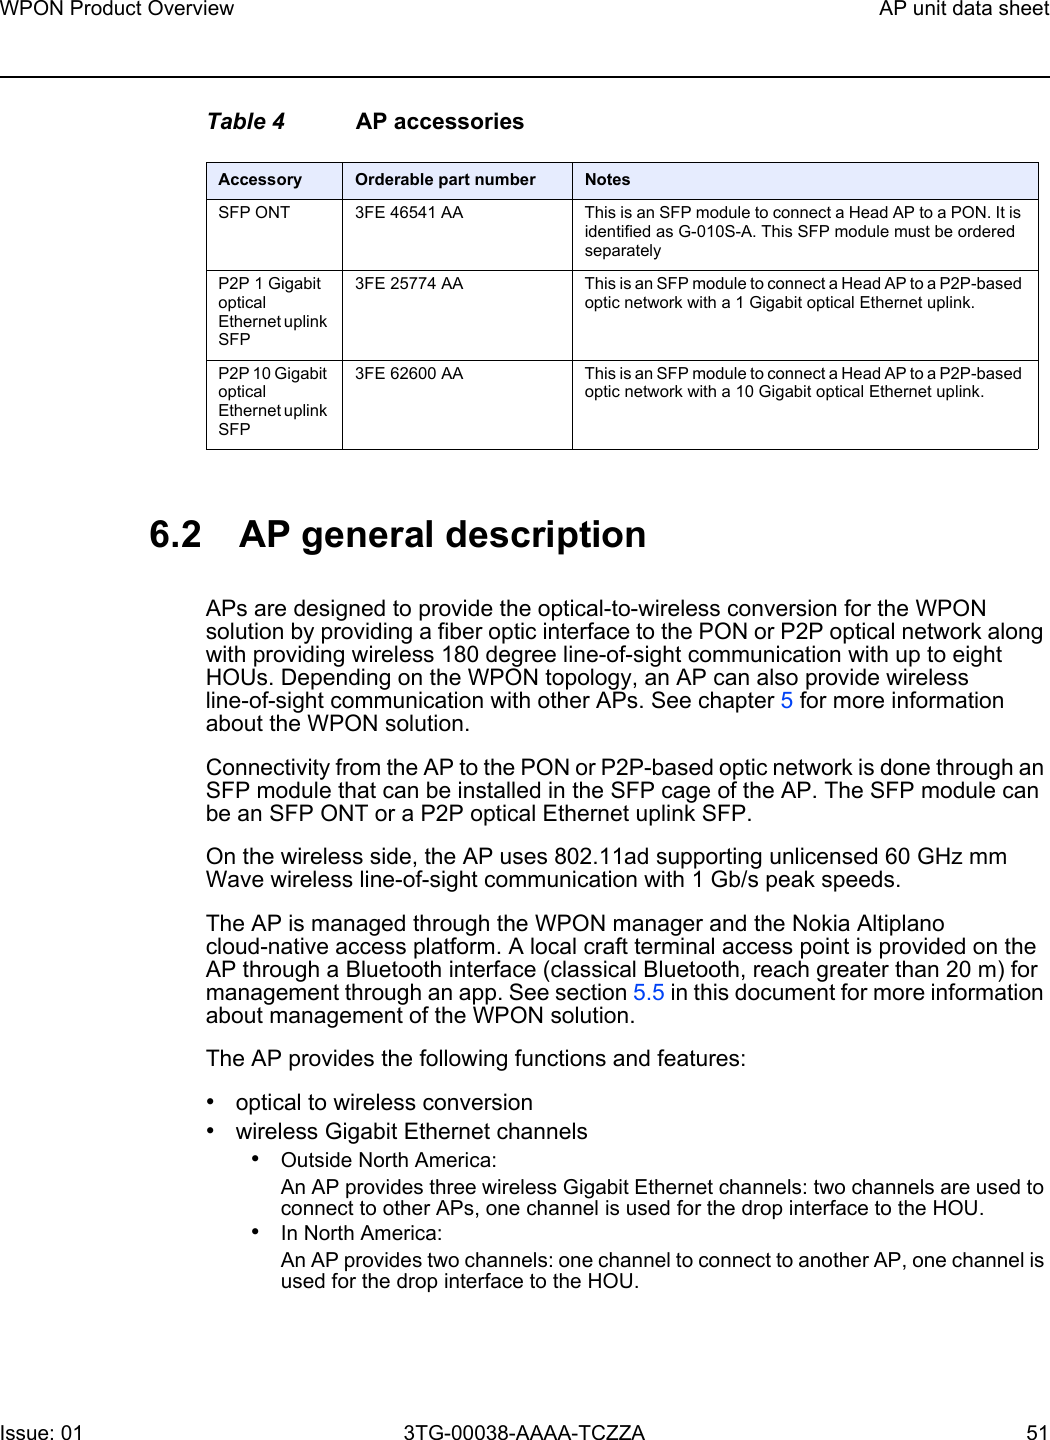 WPON Product Overview AP unit data sheetIssue: 01 3TG-00038-AAAA-TCZZA 51 Table 4 AP accessories6.2 AP general descriptionAPs are designed to provide the optical-to-wireless conversion for the WPON solution by providing a fiber optic interface to the PON or P2P optical network along with providing wireless 180 degree line-of-sight communication with up to eight HOUs. Depending on the WPON topology, an AP can also provide wireless line-of-sight communication with other APs. See chapter 5 for more information about the WPON solution.Connectivity from the AP to the PON or P2P-based optic network is done through an SFP module that can be installed in the SFP cage of the AP. The SFP module can be an SFP ONT or a P2P optical Ethernet uplink SFP.On the wireless side, the AP uses 802.11ad supporting unlicensed 60 GHz mm Wave wireless line-of-sight communication with 1 Gb/s peak speeds.The AP is managed through the WPON manager and the Nokia Altiplano cloud-native access platform. A local craft terminal access point is provided on the AP through a Bluetooth interface (classical Bluetooth, reach greater than 20 m) for management through an app. See section 5.5 in this document for more information about management of the WPON solution. The AP provides the following functions and features:•optical to wireless conversion•wireless Gigabit Ethernet channels•Outside North America: An AP provides three wireless Gigabit Ethernet channels: two channels are used to connect to other APs, one channel is used for the drop interface to the HOU.•In North America: An AP provides two channels: one channel to connect to another AP, one channel is used for the drop interface to the HOU.Accessory Orderable part number NotesSFP ONT 3FE 46541 AA  This is an SFP module to connect a Head AP to a PON. It is identified as G-010S-A. This SFP module must be ordered separatelyP2P 1 Gigabit optical Ethernet uplink SFP3FE 25774 AA This is an SFP module to connect a Head AP to a P2P-based optic network with a 1 Gigabit optical Ethernet uplink.P2P 10 Gigabit optical Ethernet uplink SFP3FE 62600 AA This is an SFP module to connect a Head AP to a P2P-based optic network with a 10 Gigabit optical Ethernet uplink.